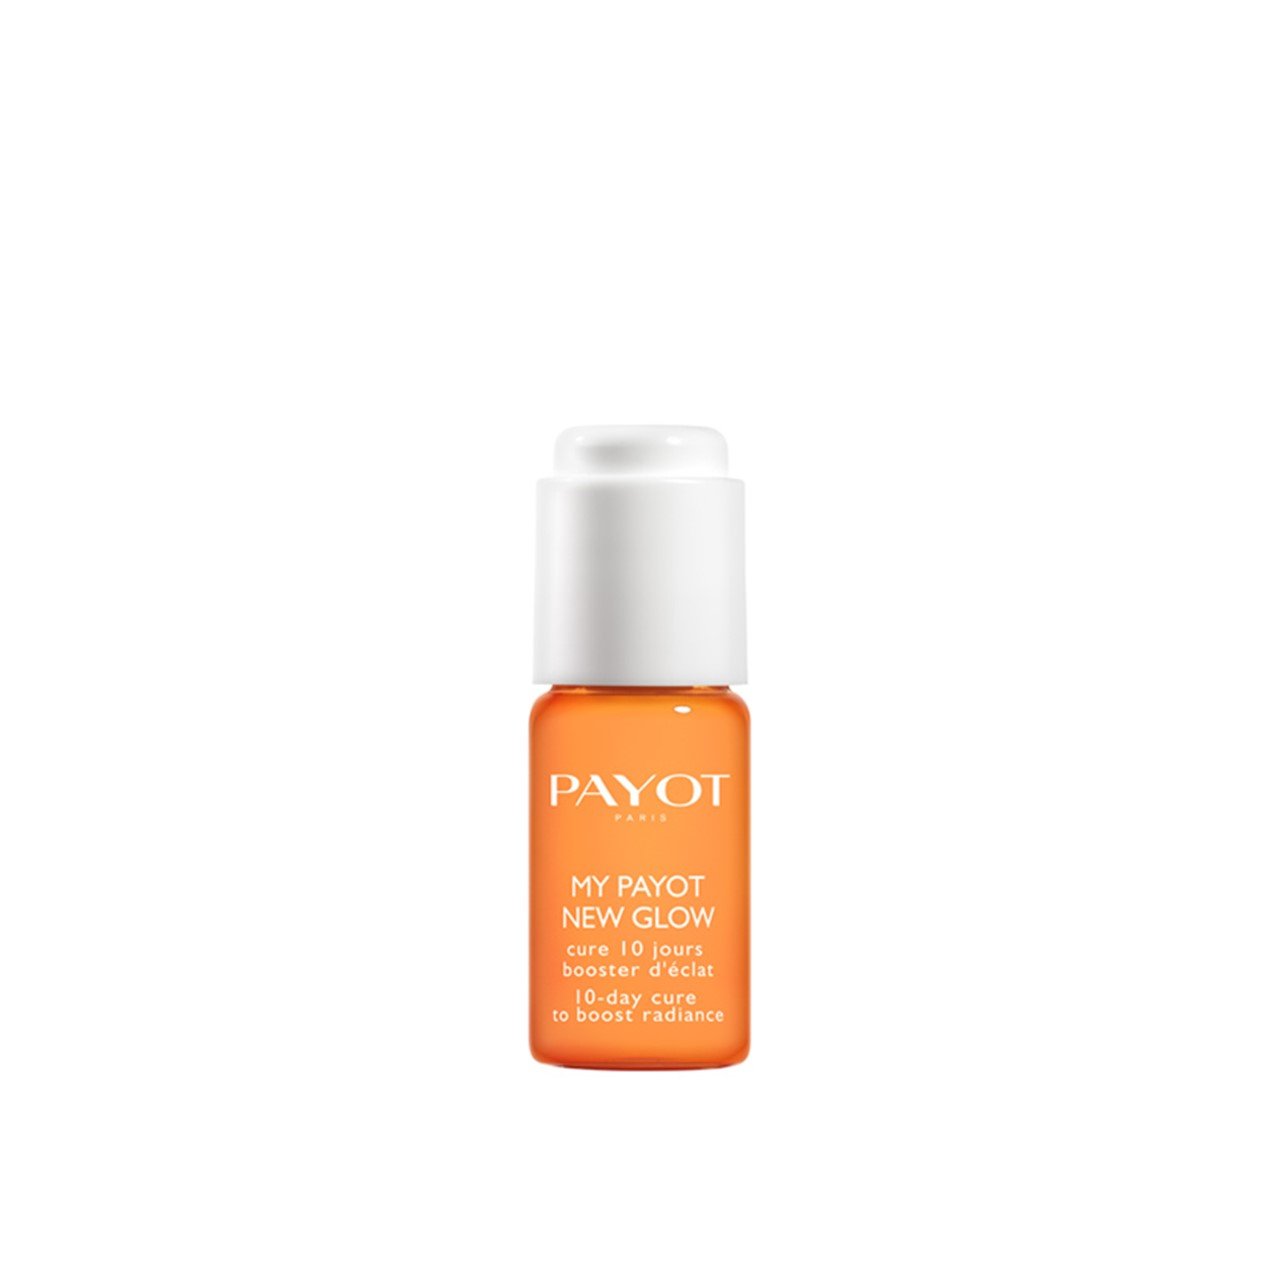 Payot My Payot New Glow 10-Day Cure To Boost Radiance 7ml